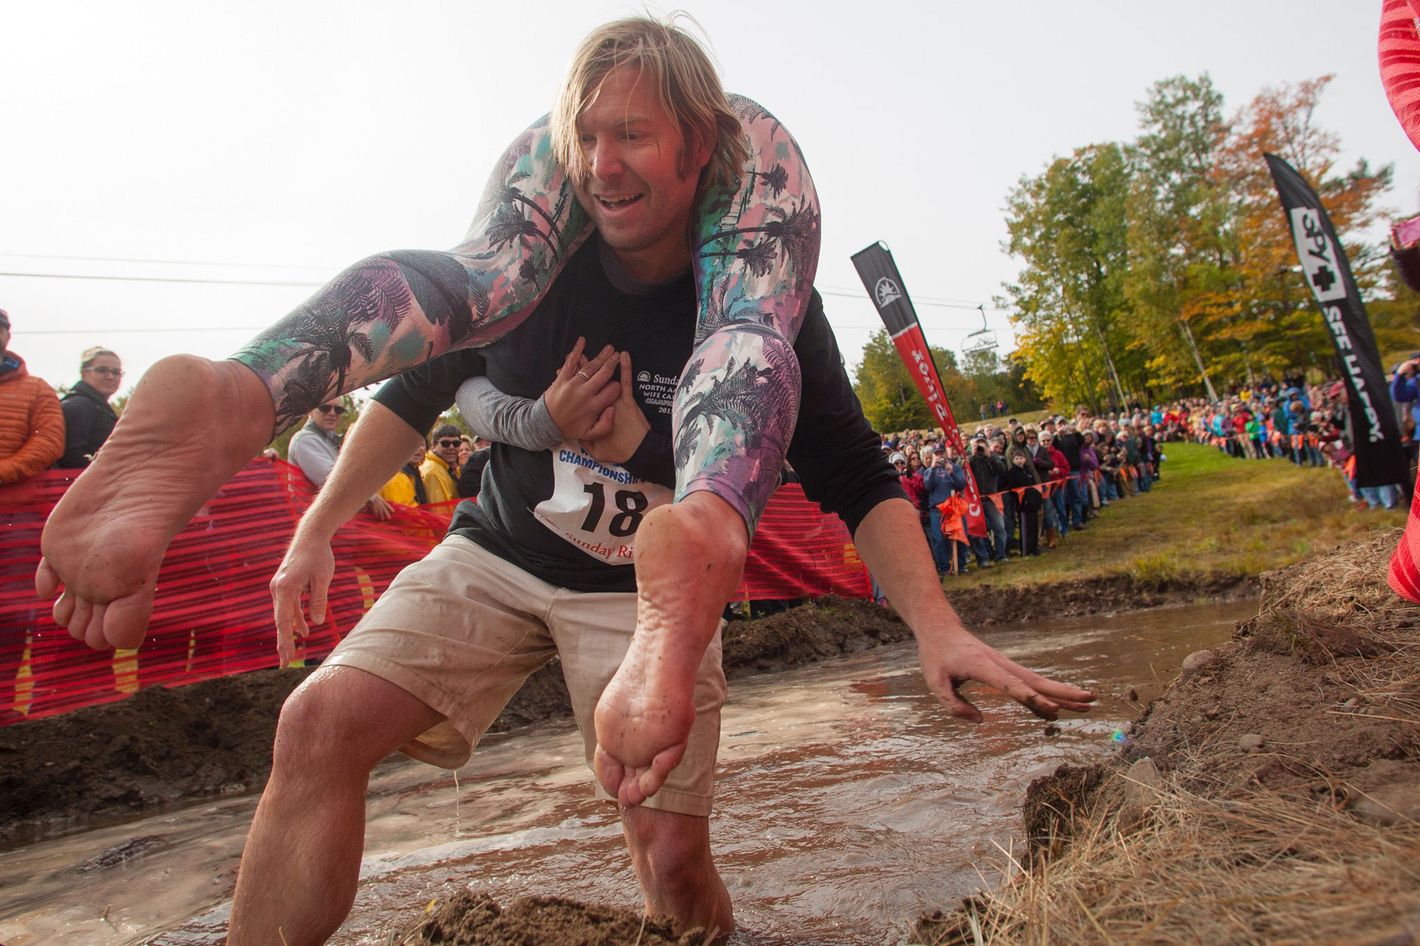 The Finnish Sport of Wife-Carrying